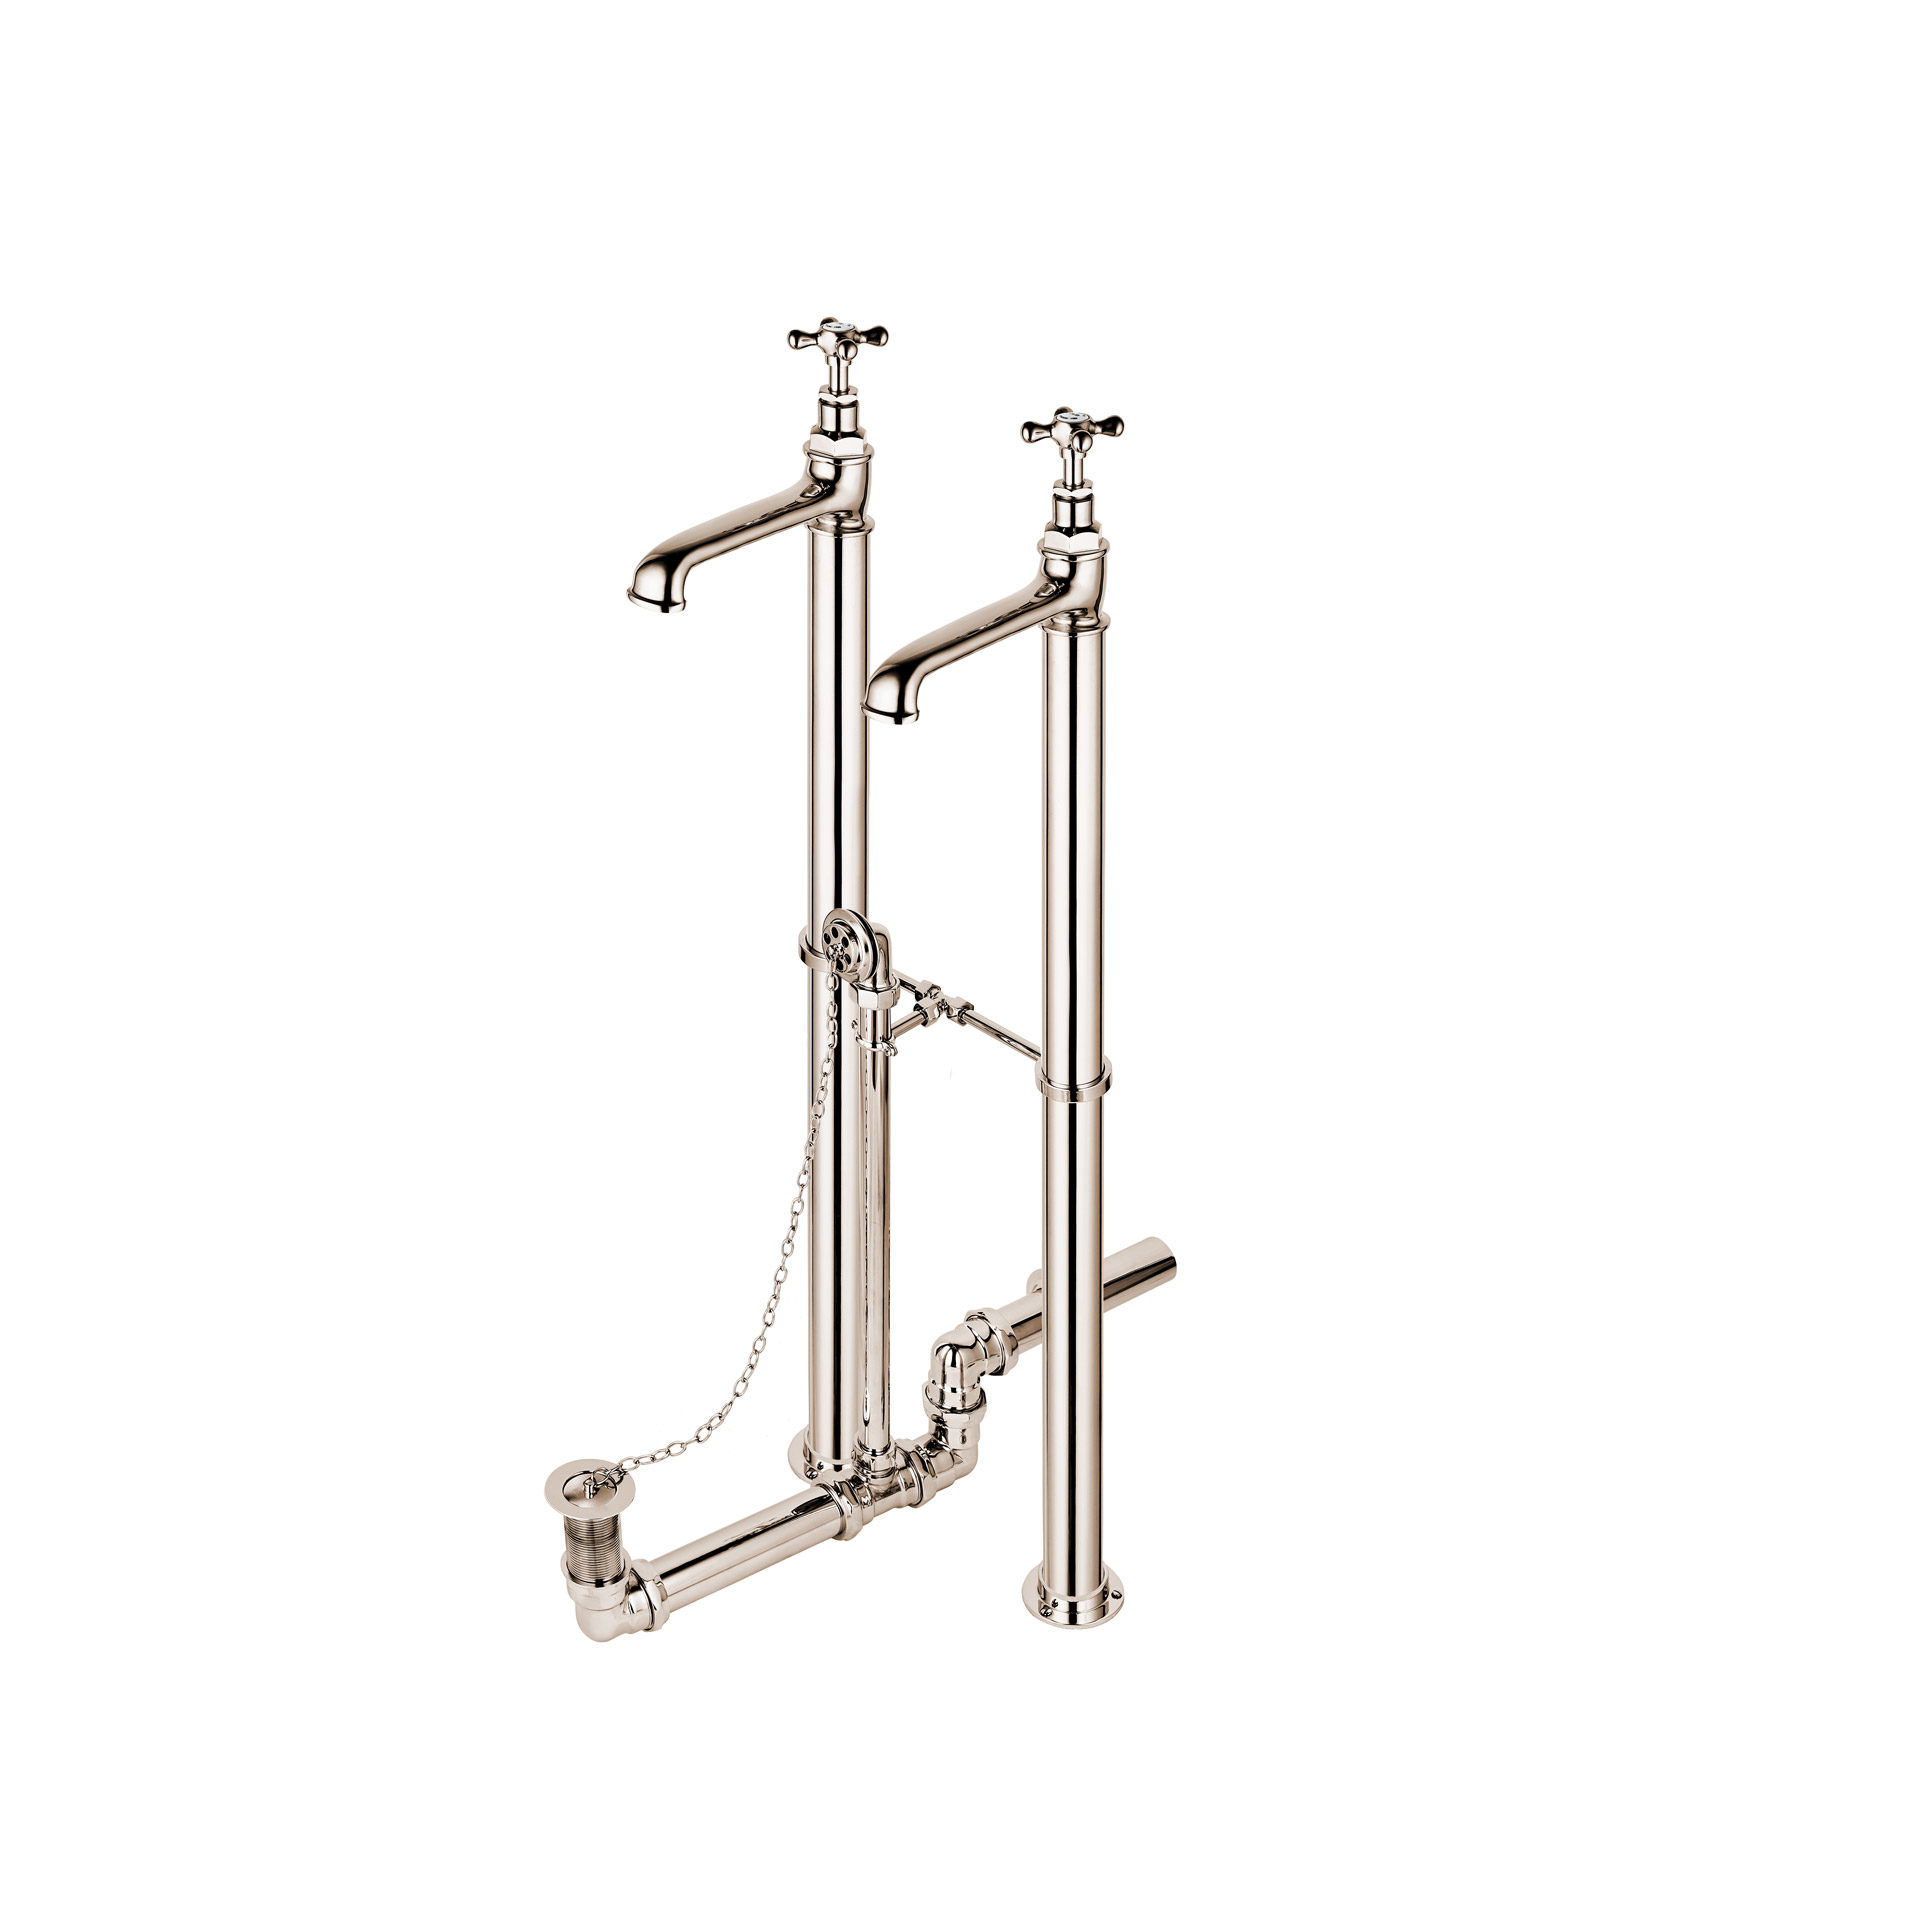 Floor Mounted Bath Taps with 2″ Floor Stands, Bracing Kit and Chain and Plug